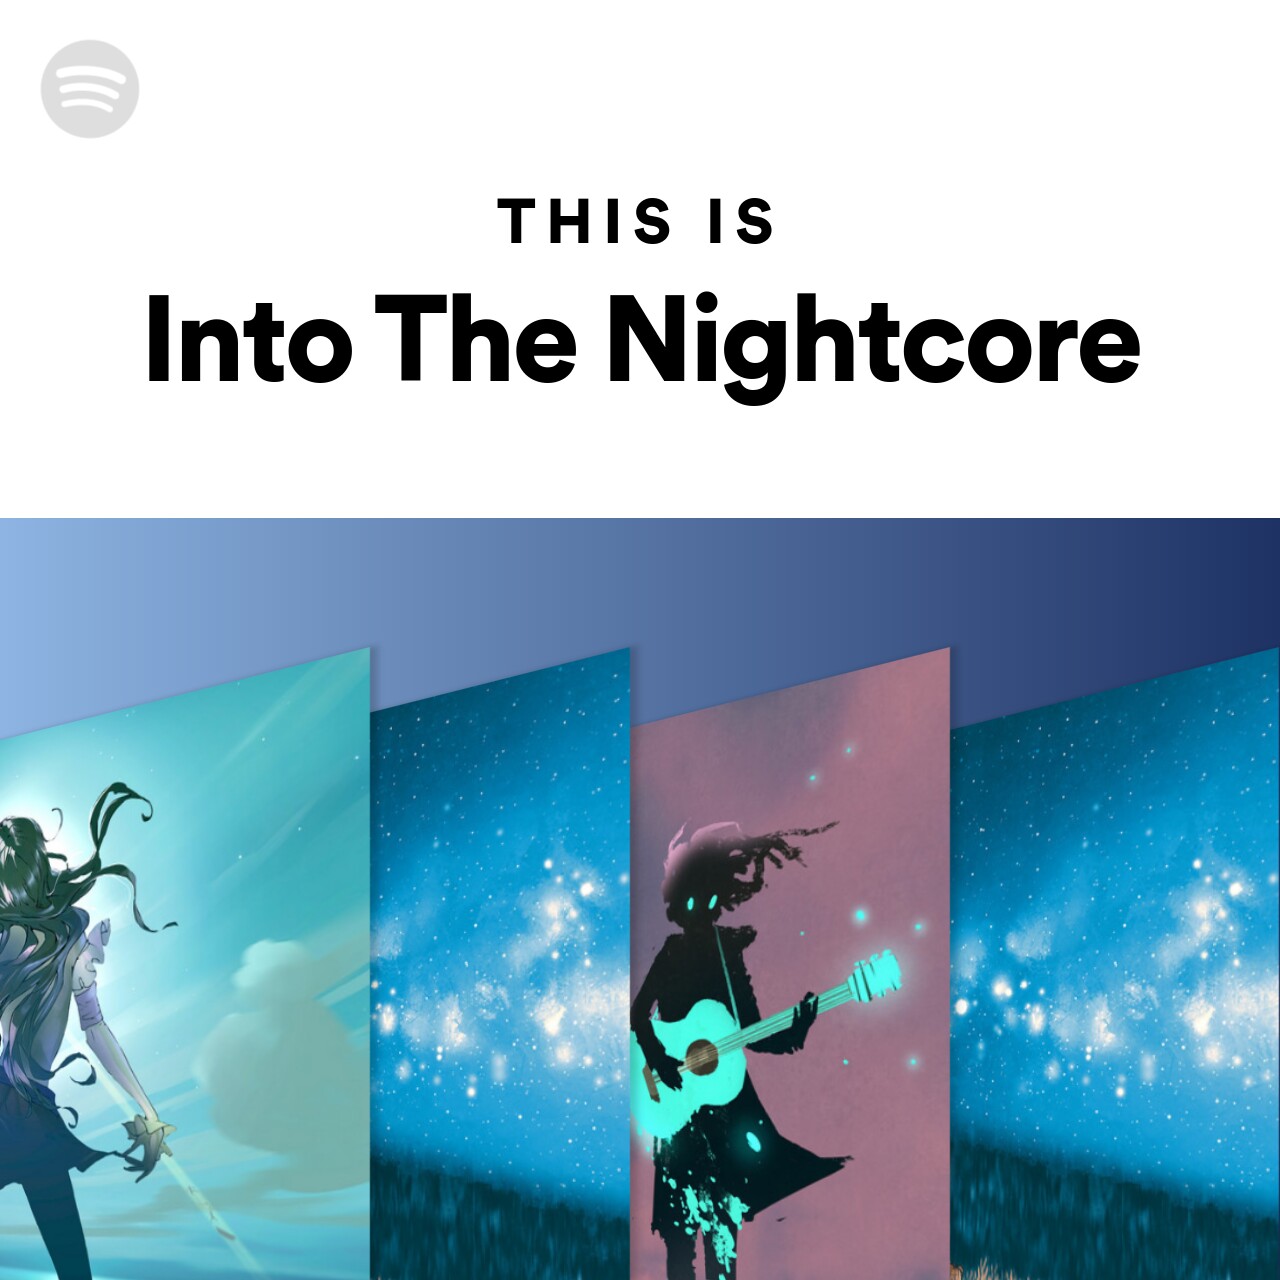 This Is Into The Nightcore